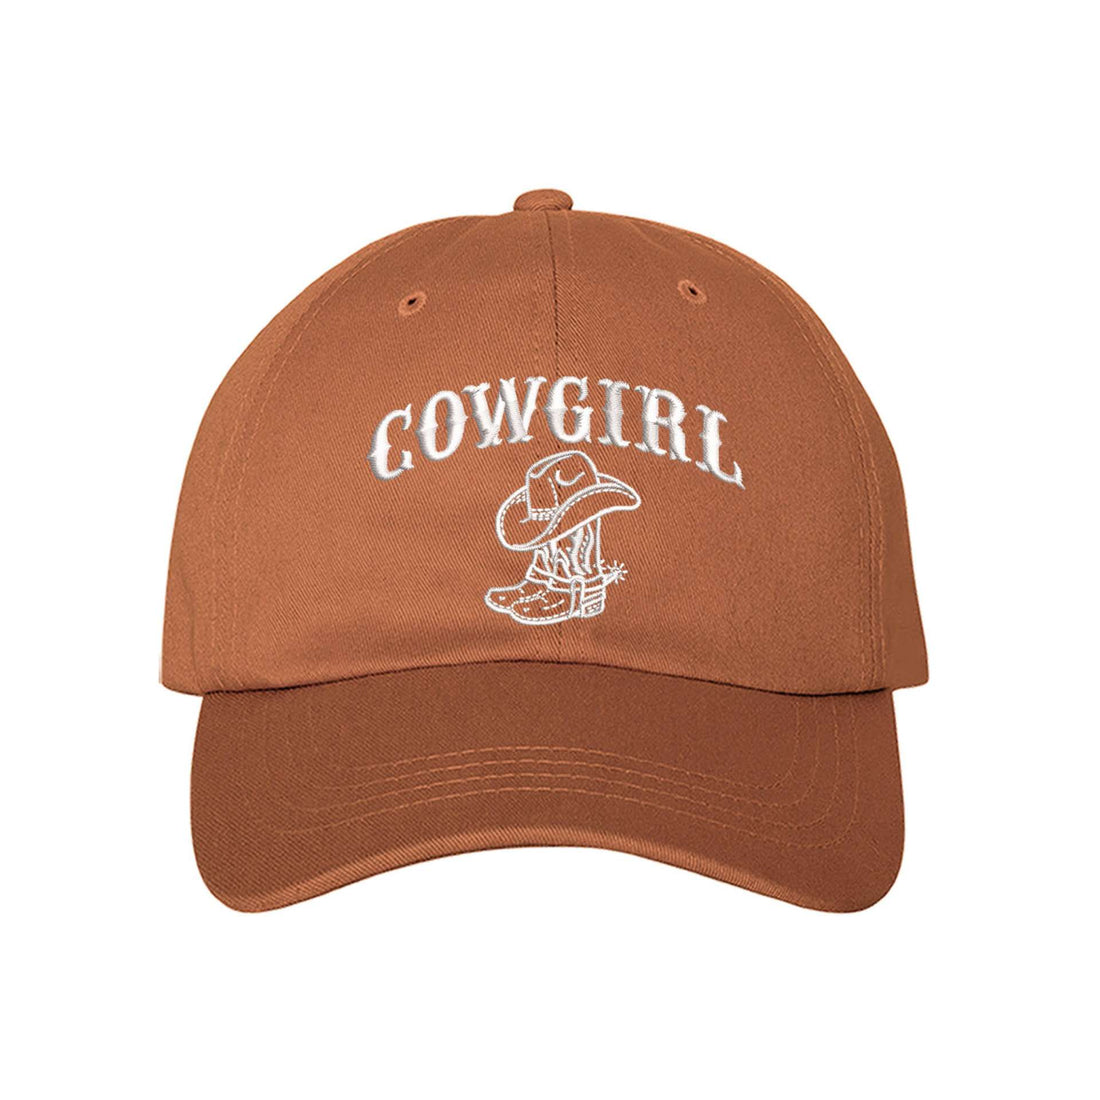 Cowgirl Boots Baseball Hat